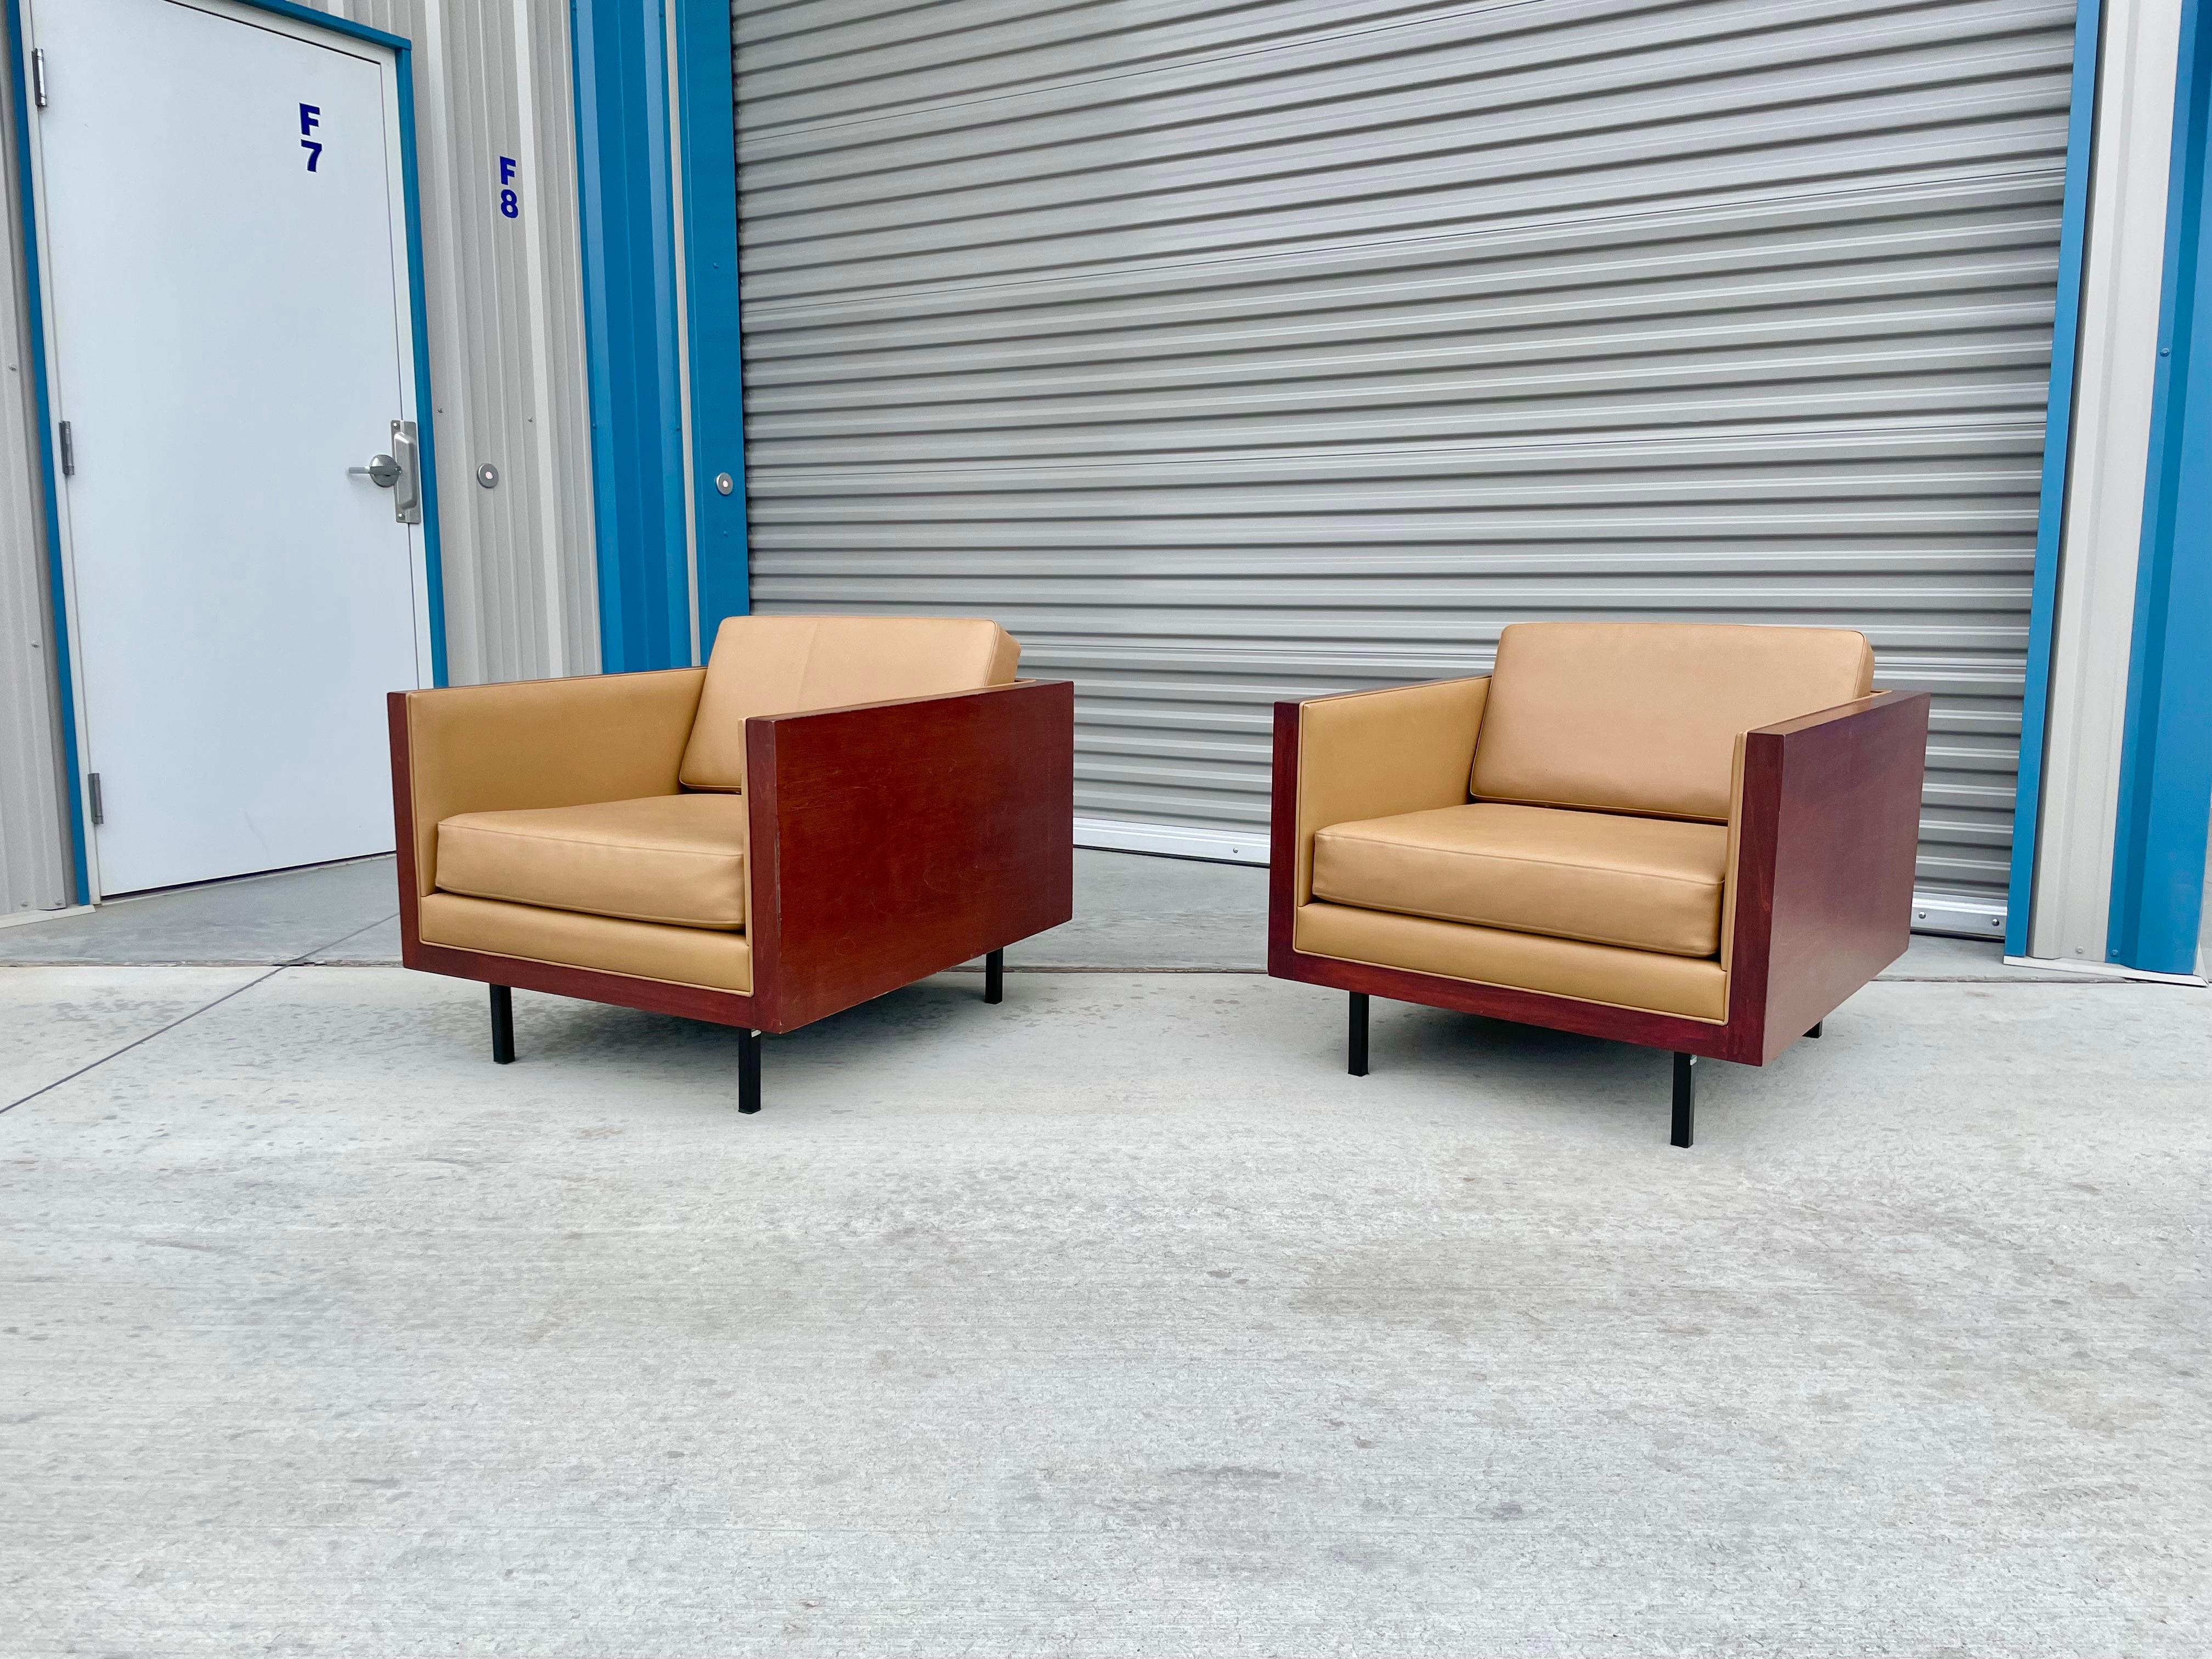 Mid-century cube lounge chairs were designed and manufactured in the United States circa 1970s. These beautiful lounge chairs feature a wooden cube shape design. The chairs are also covered in a brown vinyl upholstery fabric that is in good shape